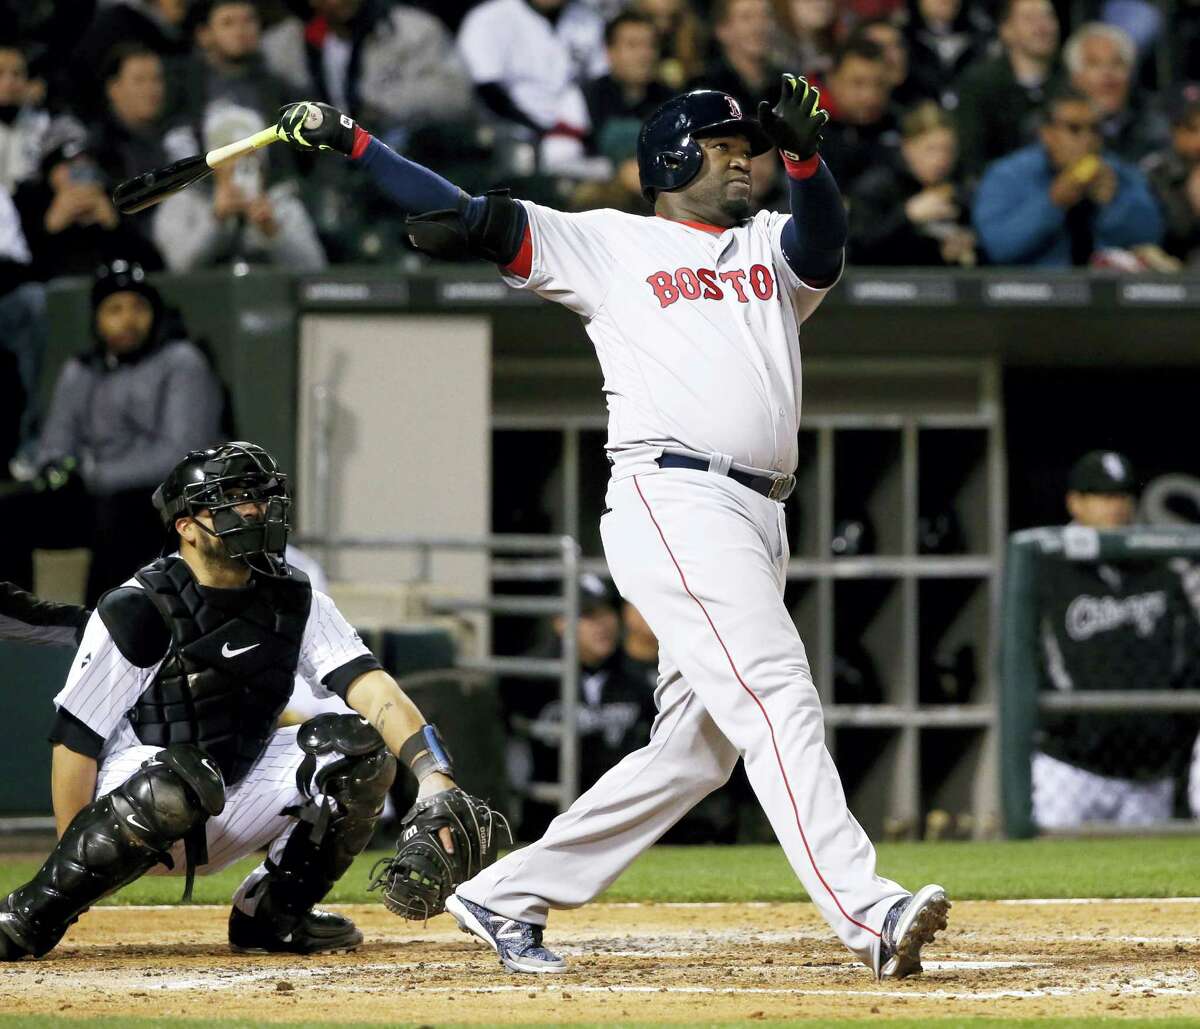 Boston Red Sox's David Ortiz watches his two-run home run off Chicago White Sox starting pitcher Carlos Rodon, also scoring Xander Bogaerts, during the fifth inning of a baseball game Wednesday, May 4, 2016, in Chicago. Watching with Ortiz is catcher Dioner Navarro. (AP Photo/Charles Rex Arbogast)